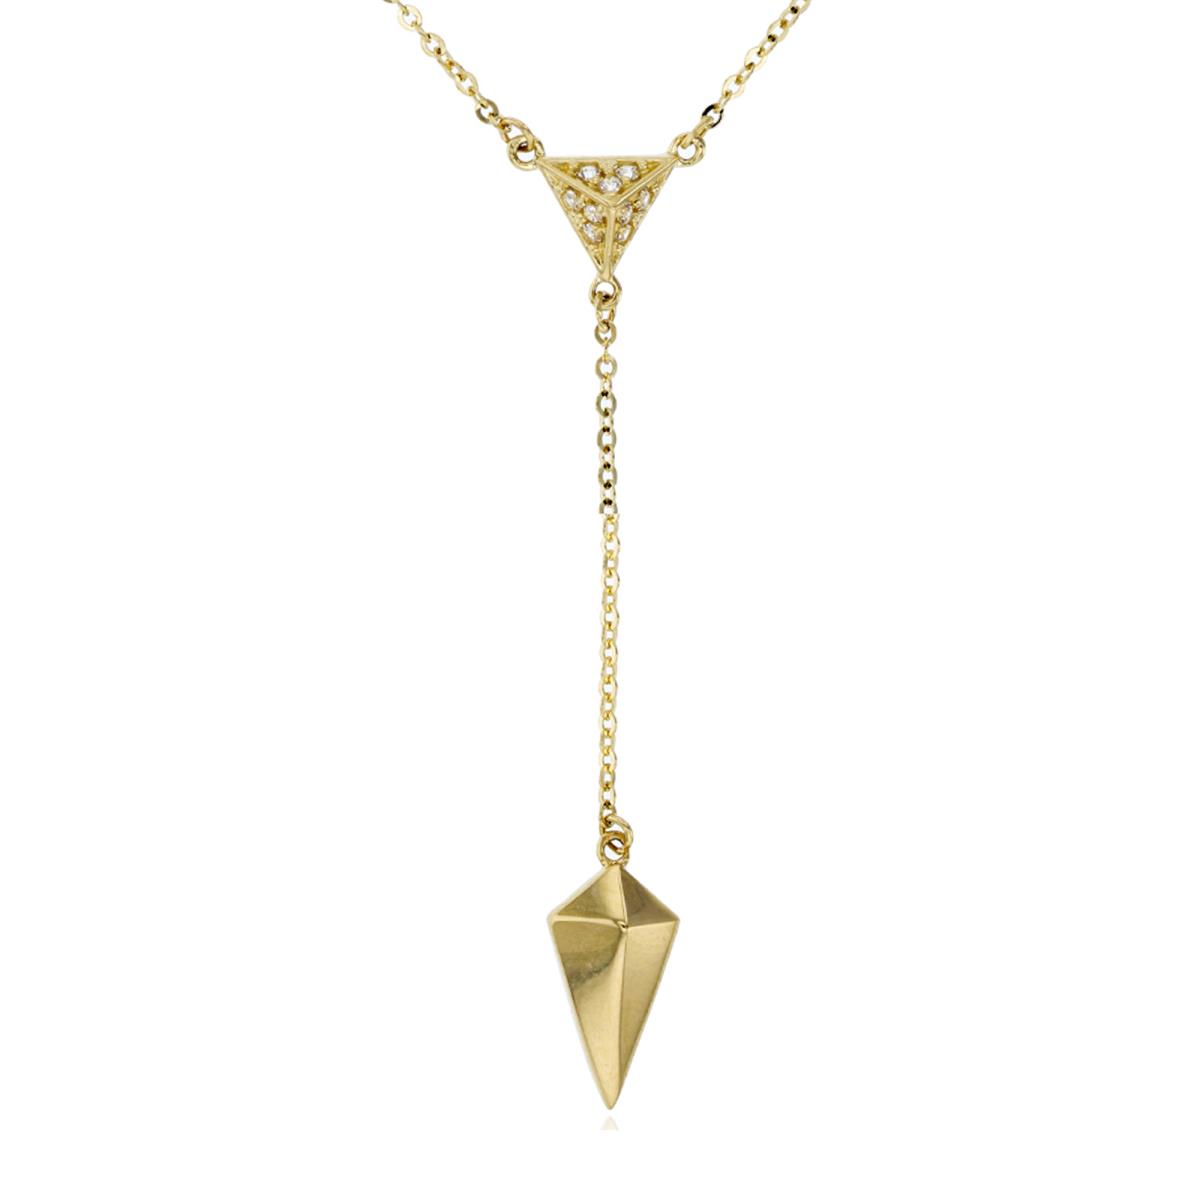 14K Yellow Gold Micropave Domed Triangle & Dangling Polished Rhombus 16"+2" Necklace